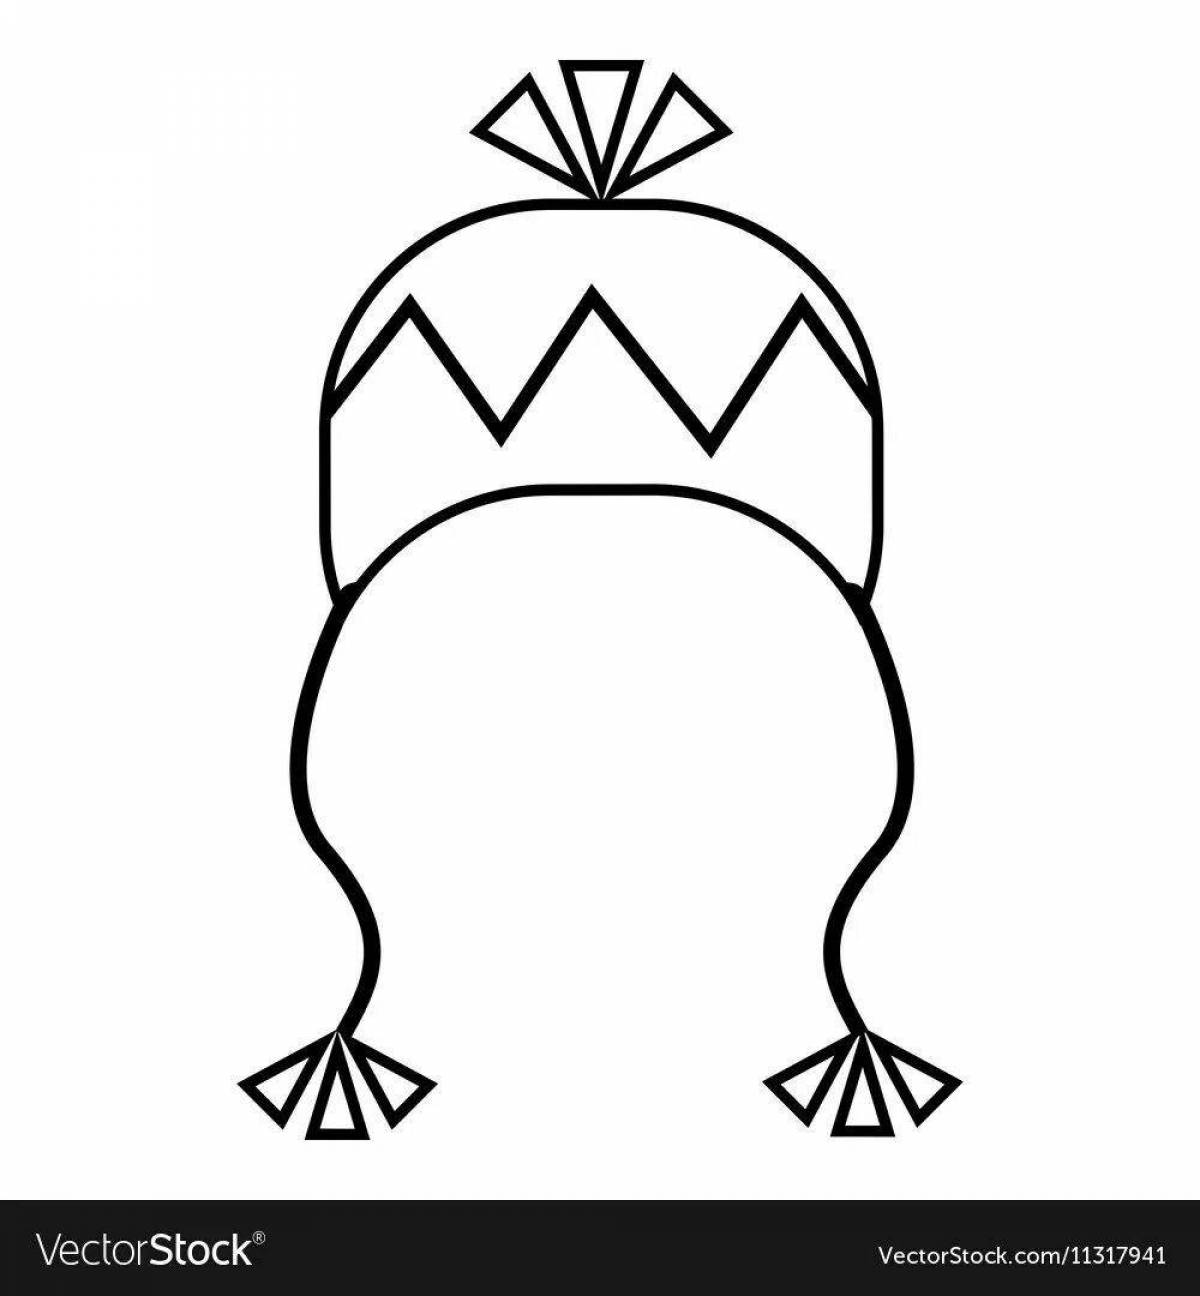 Animated snowman scarf coloring page